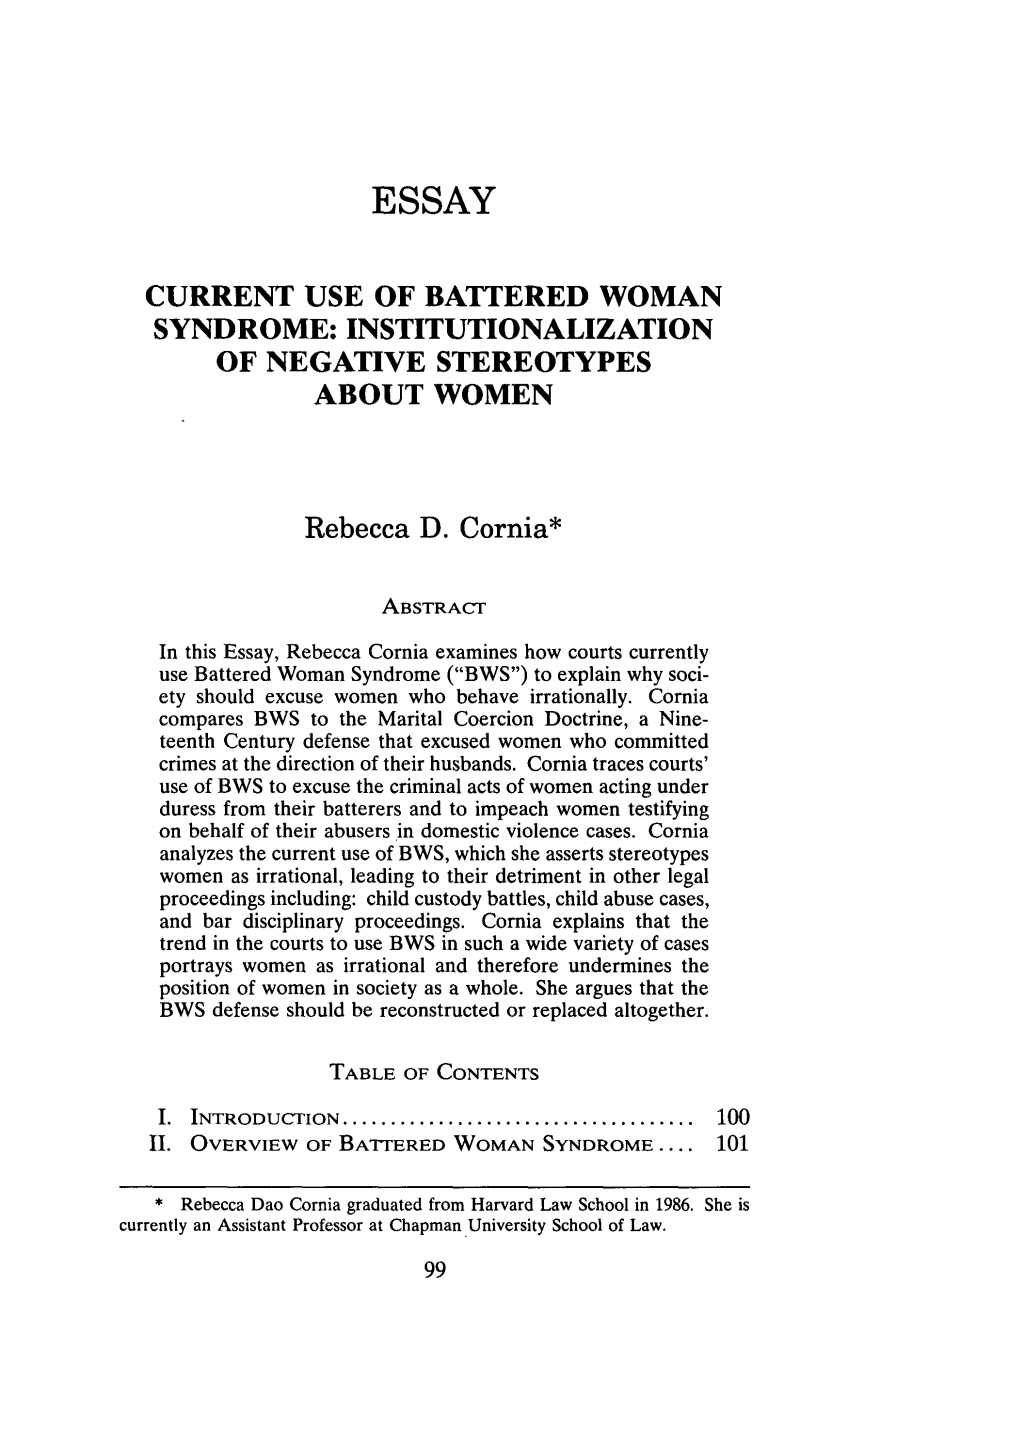 Current Use of Battered Woman Syndrome: Institutionalization of Negative Stereotypes About Women